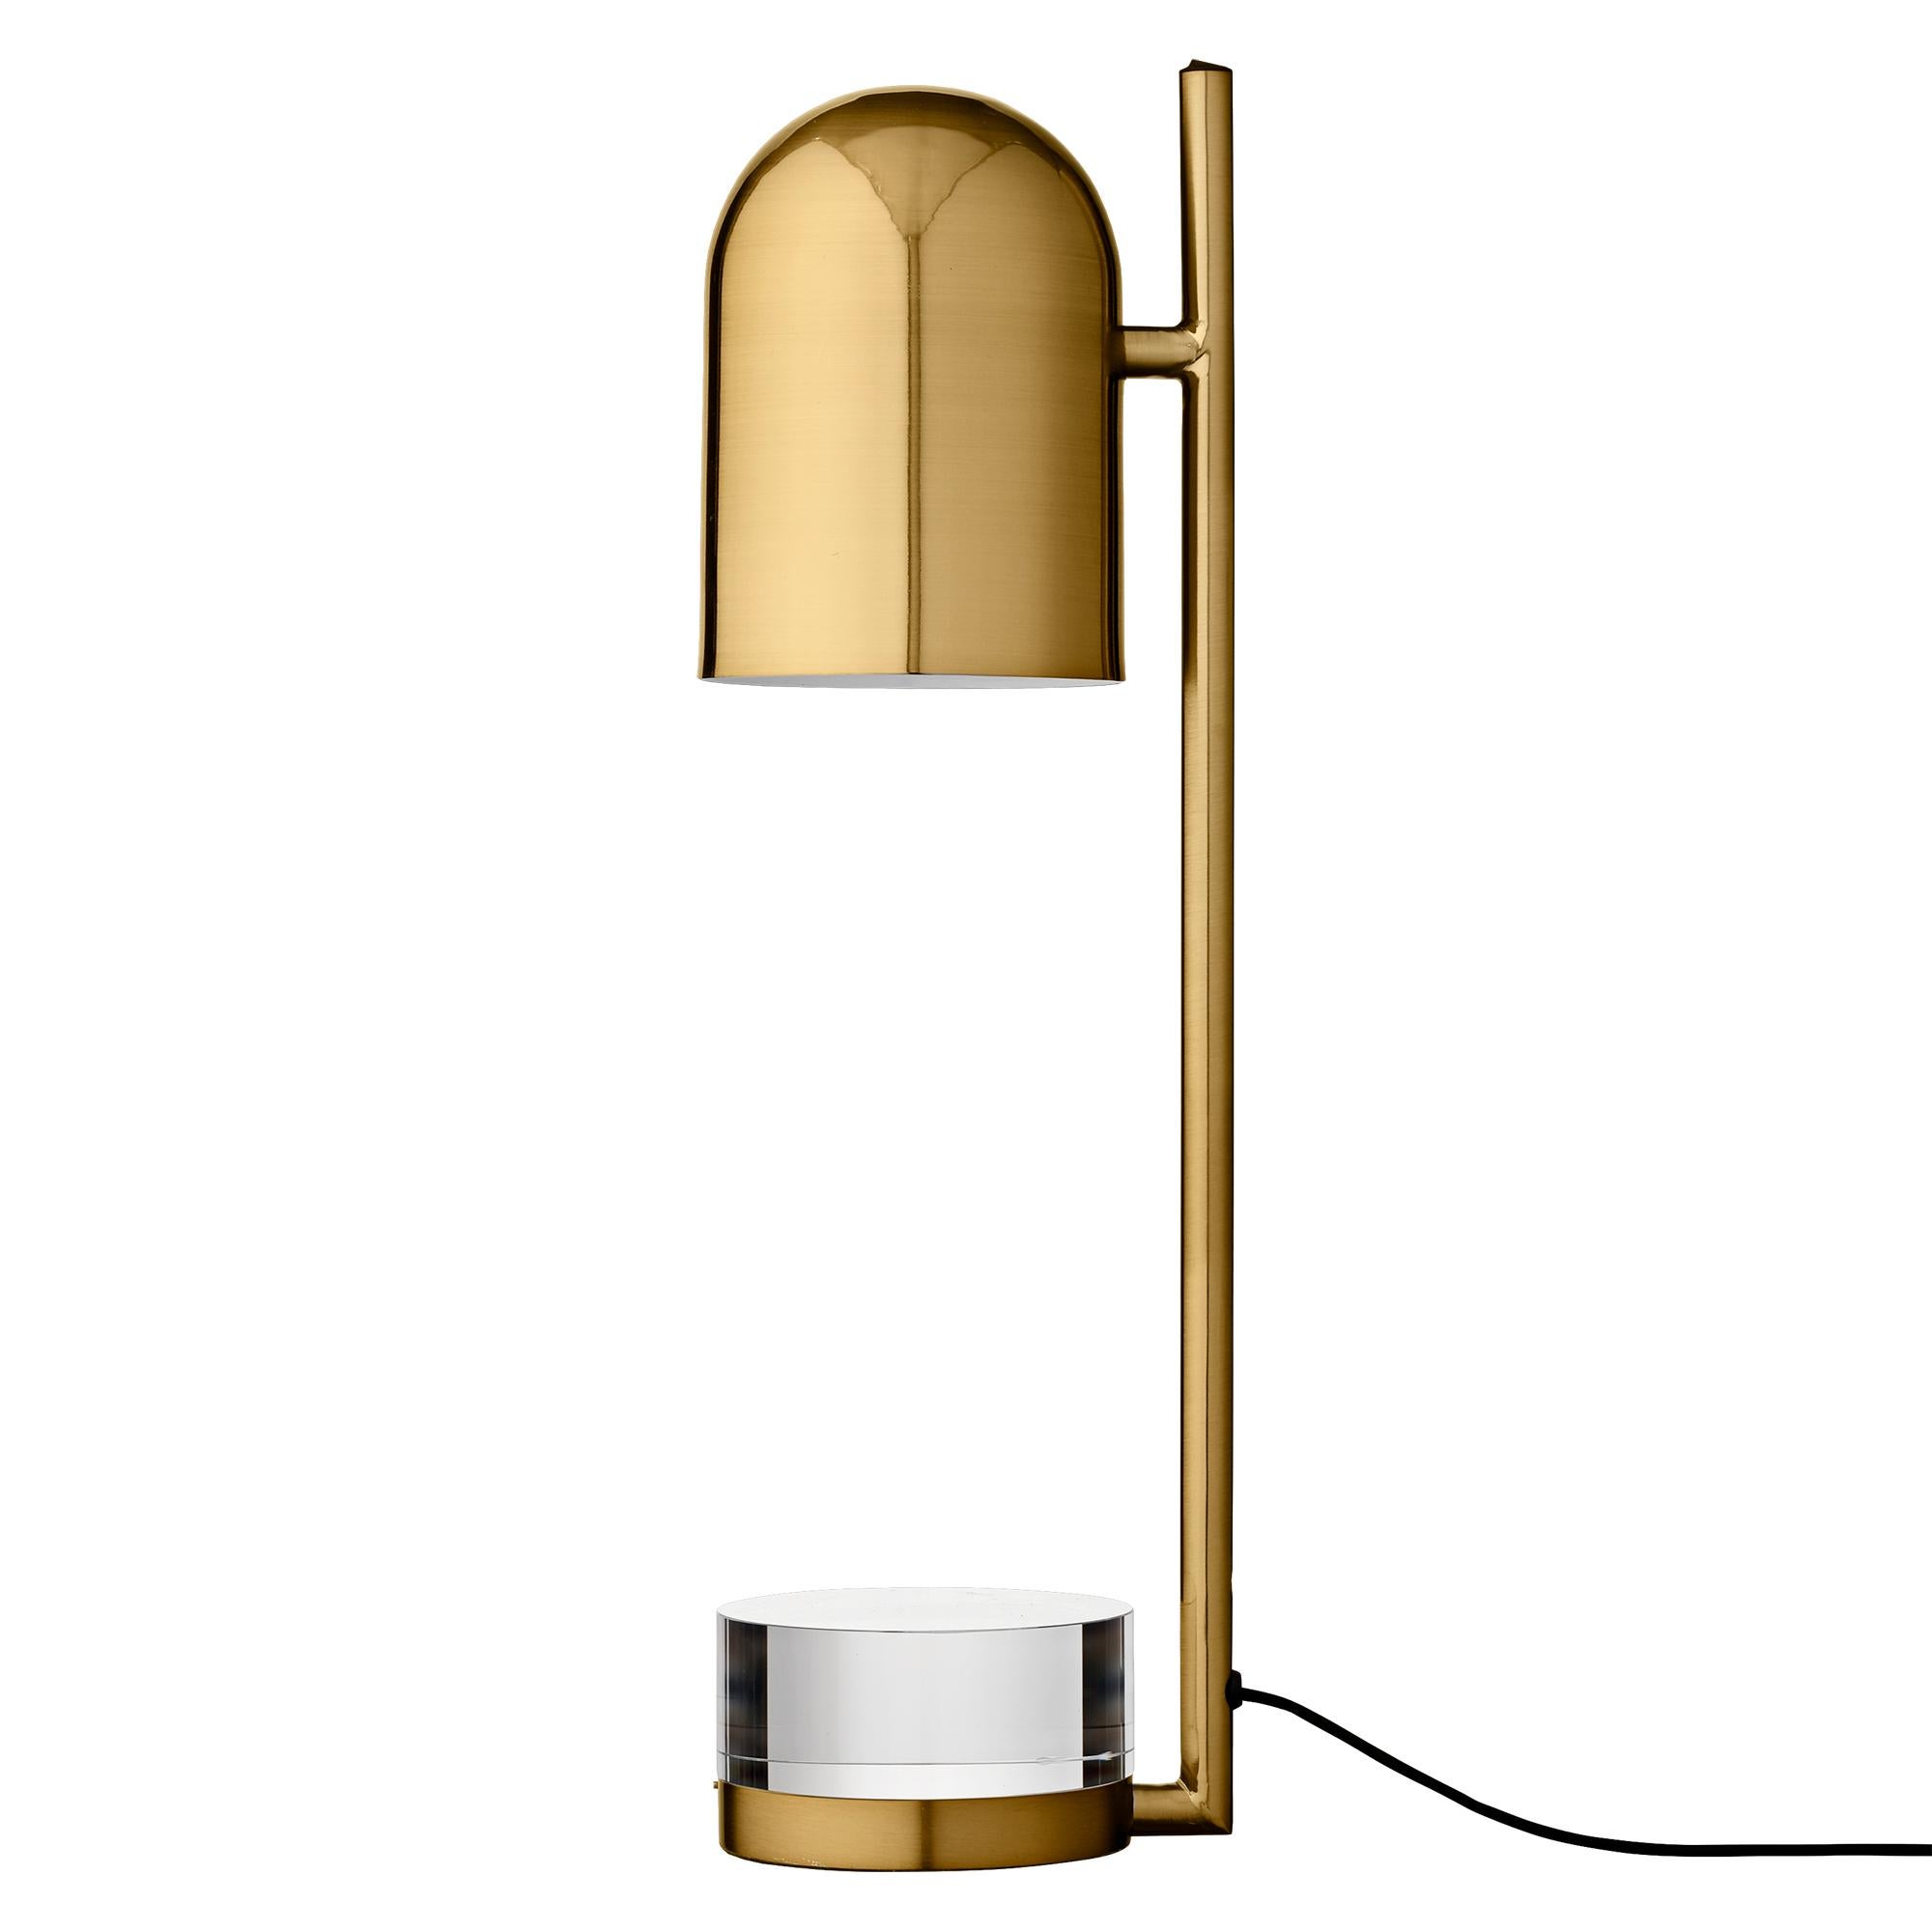 Gold cylinder table lamp
Dimensions: Diameter 12 x H 50 cm 
Materials: Glass, Iron w. brass plating & powder coating.
Details: For all lamps, the recommended light source is E27 max 25W&220/240 voltage. We recommend LED in order to avoid